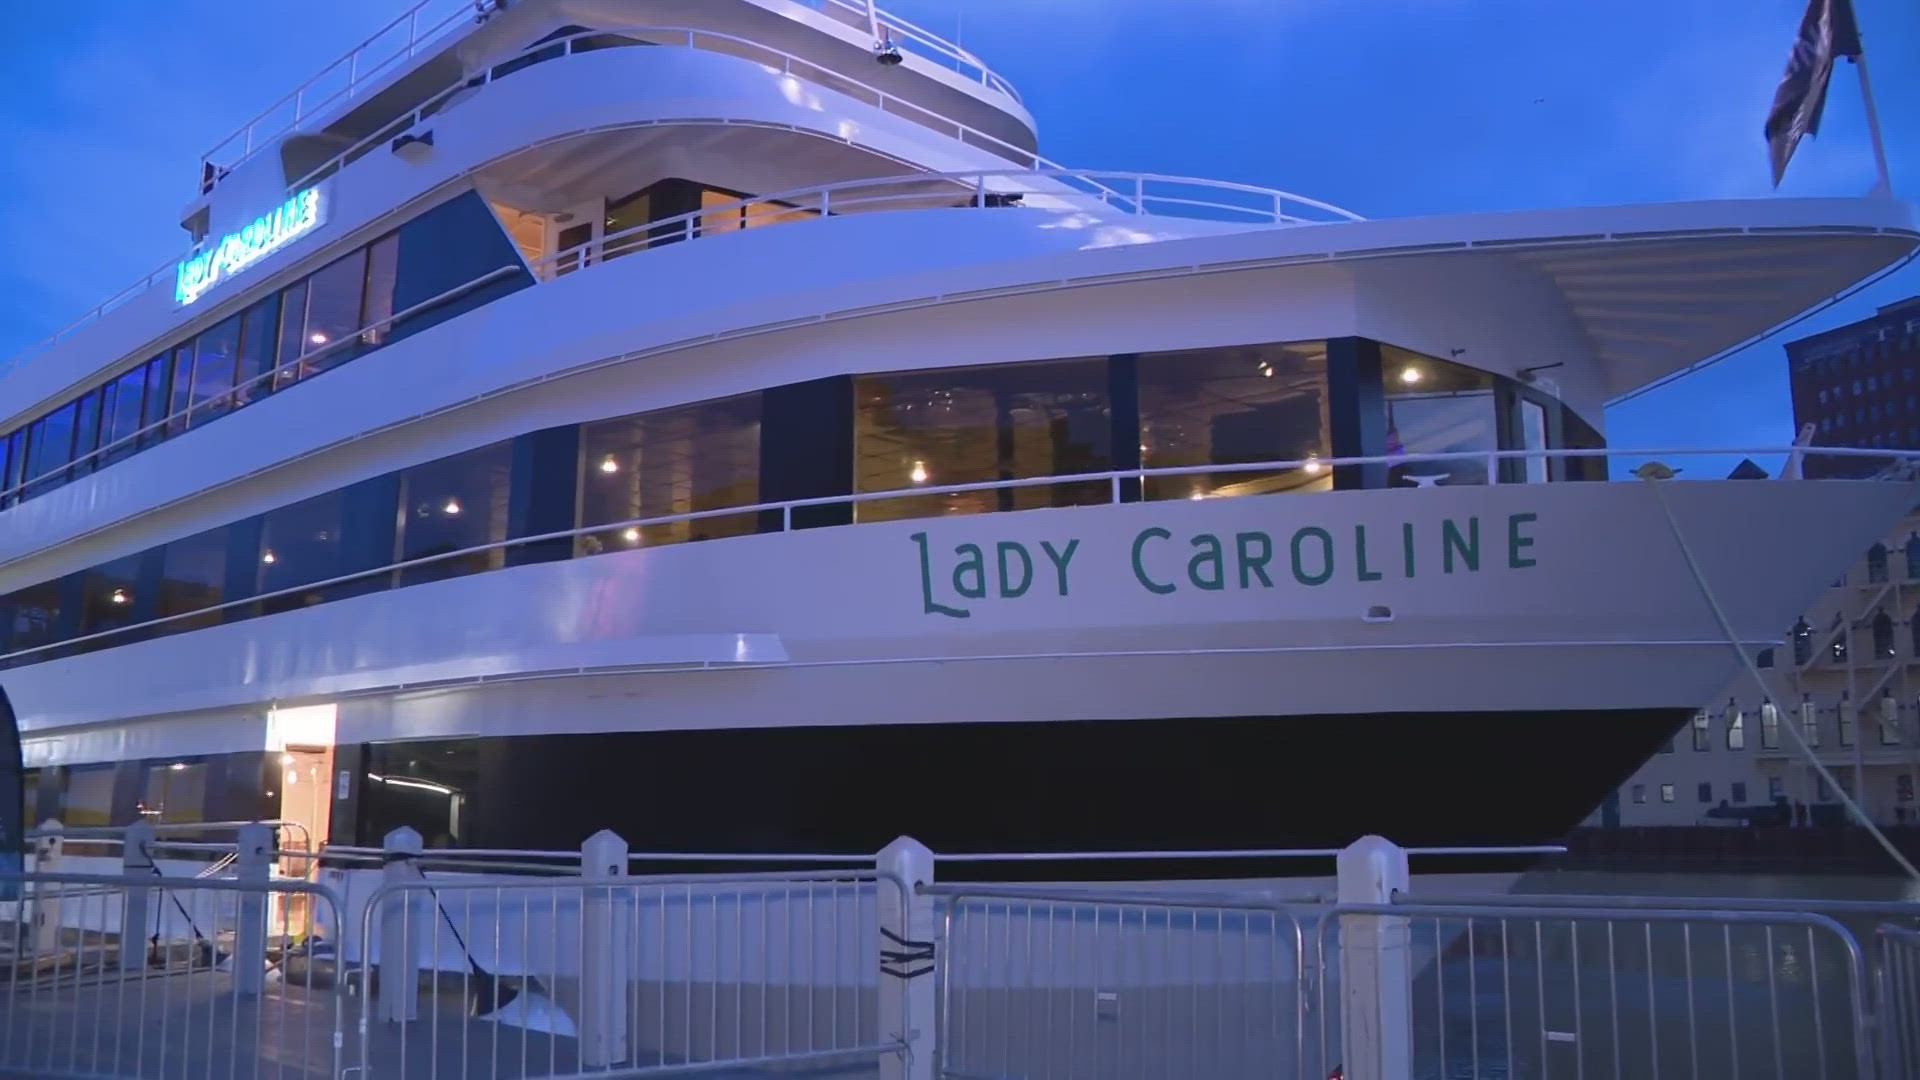 For the past 30 years, the Nautica Queen has been a Cleveland summer staple. Now, the water is getting a new ship known as the Lady Caroline.